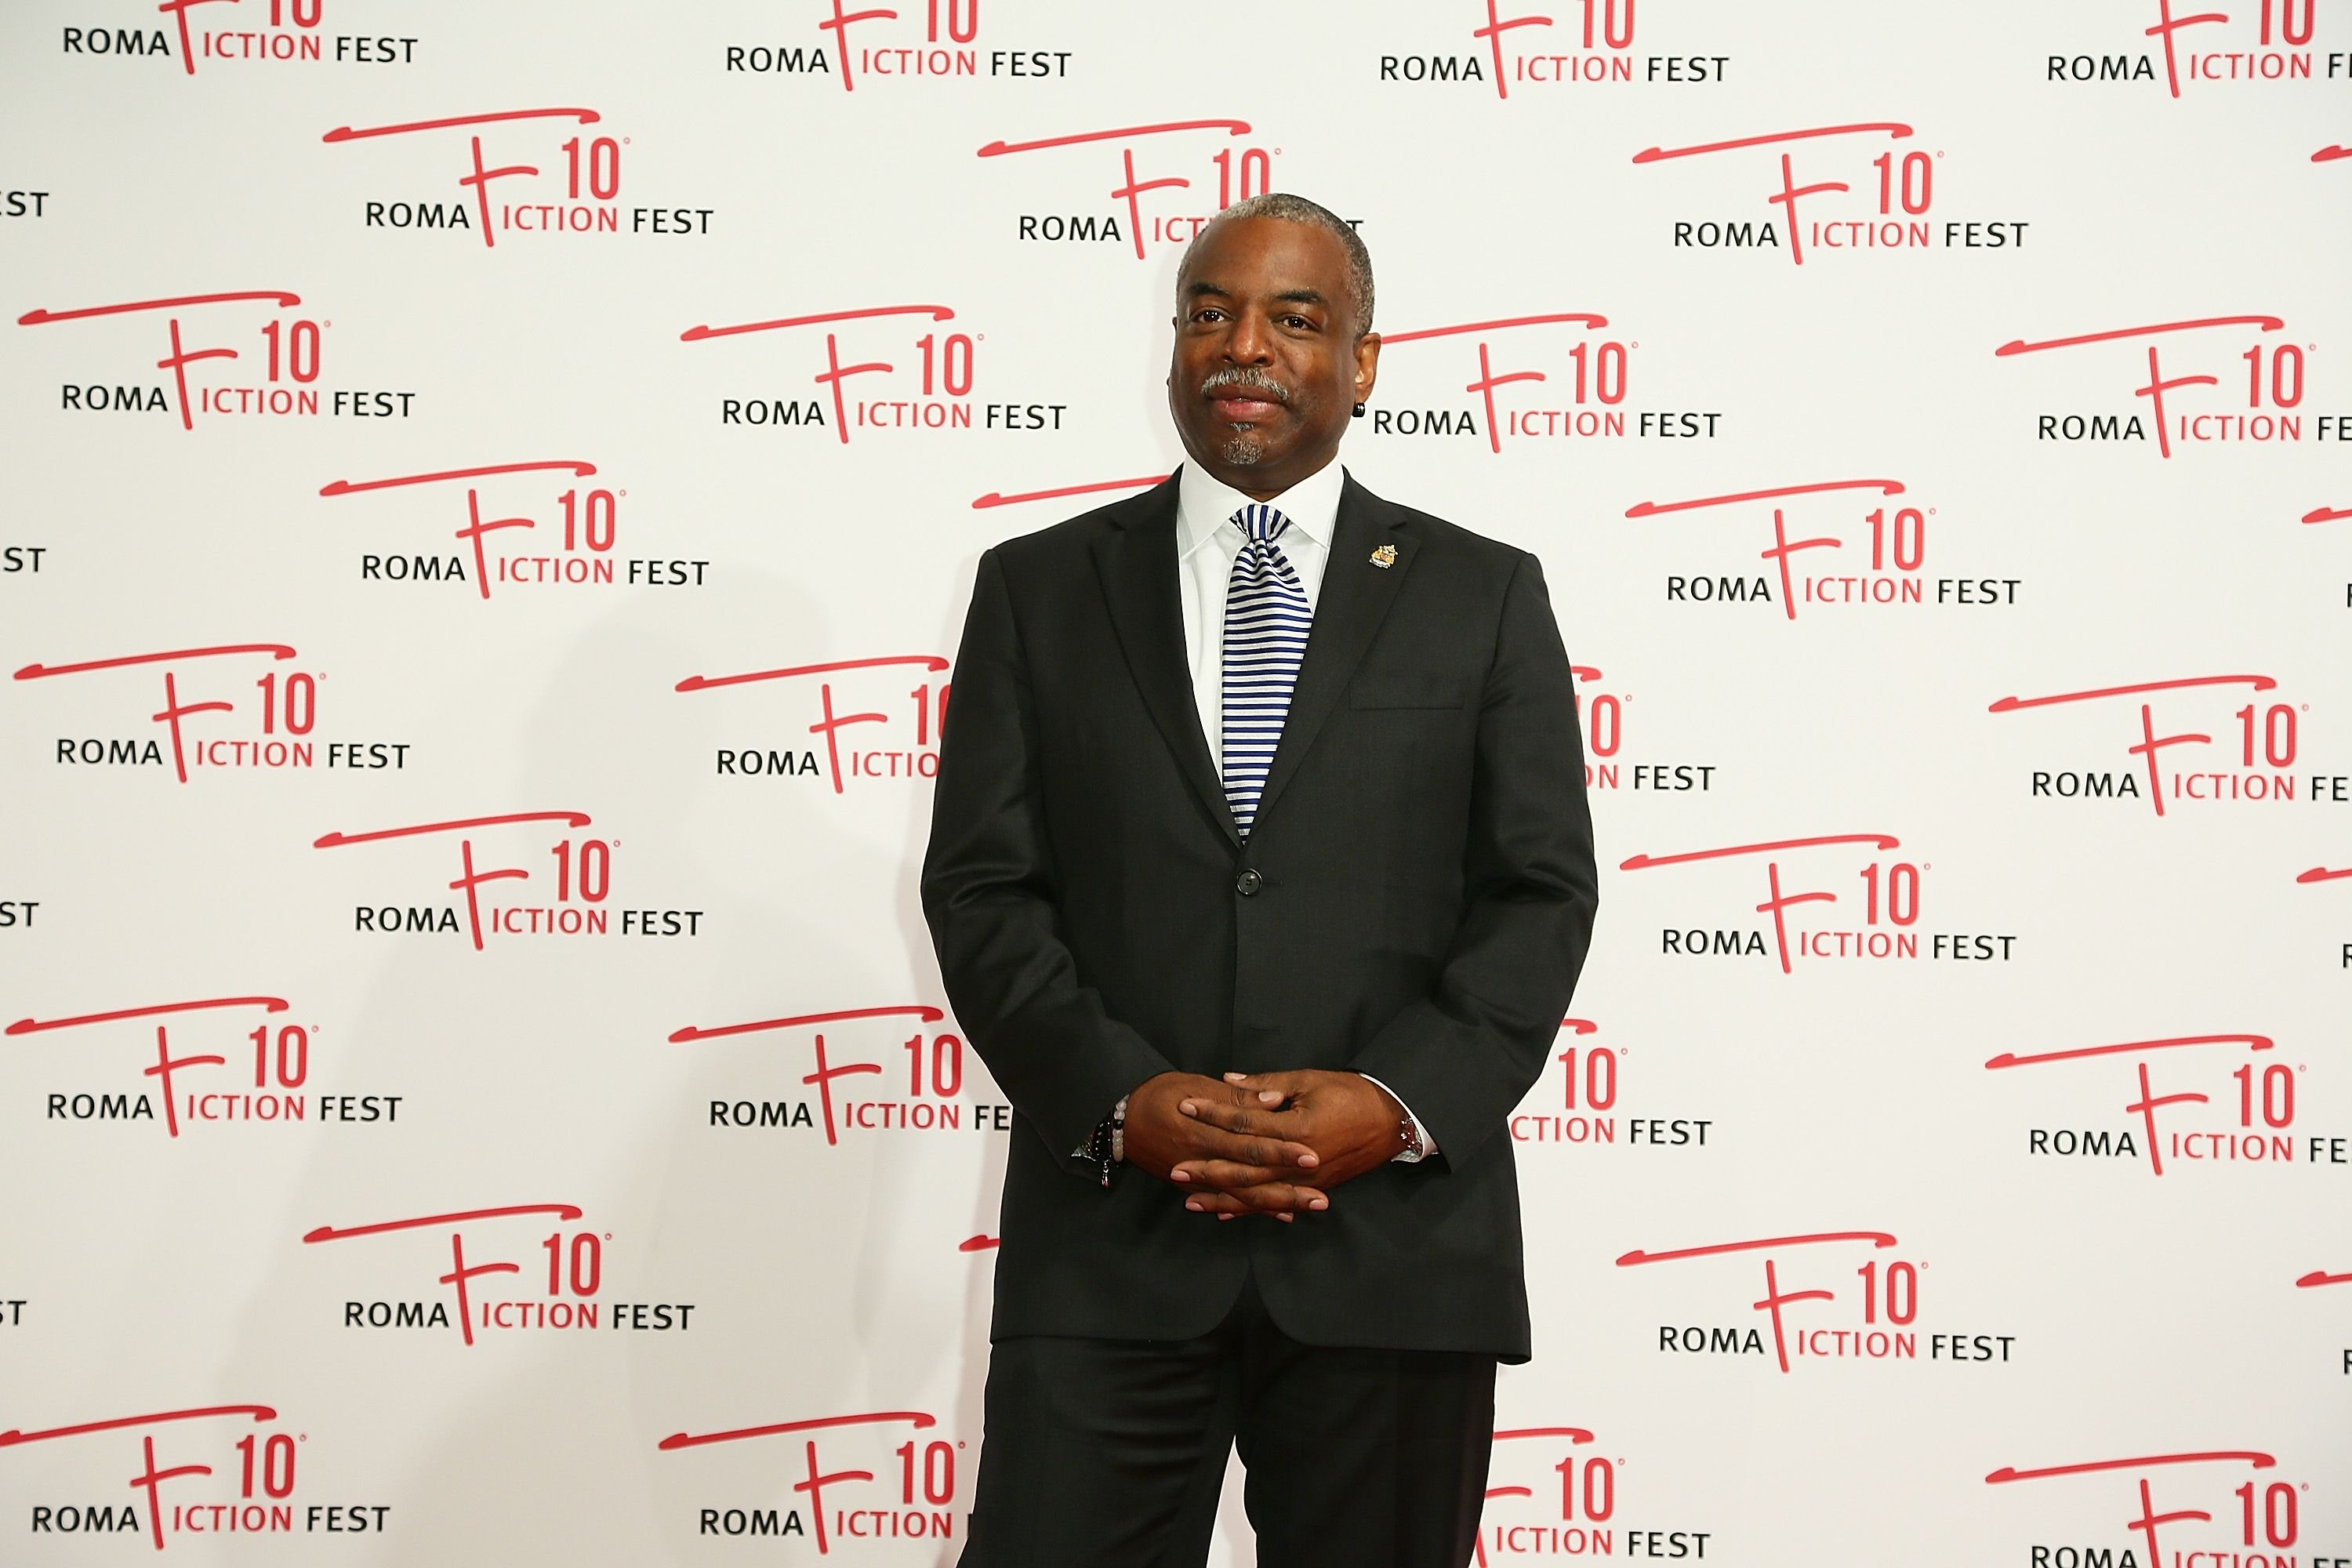 LeVar Burton attends the 'Roots' red carpet during the Roma Fiction Fest 2016 | Source: Getty Images